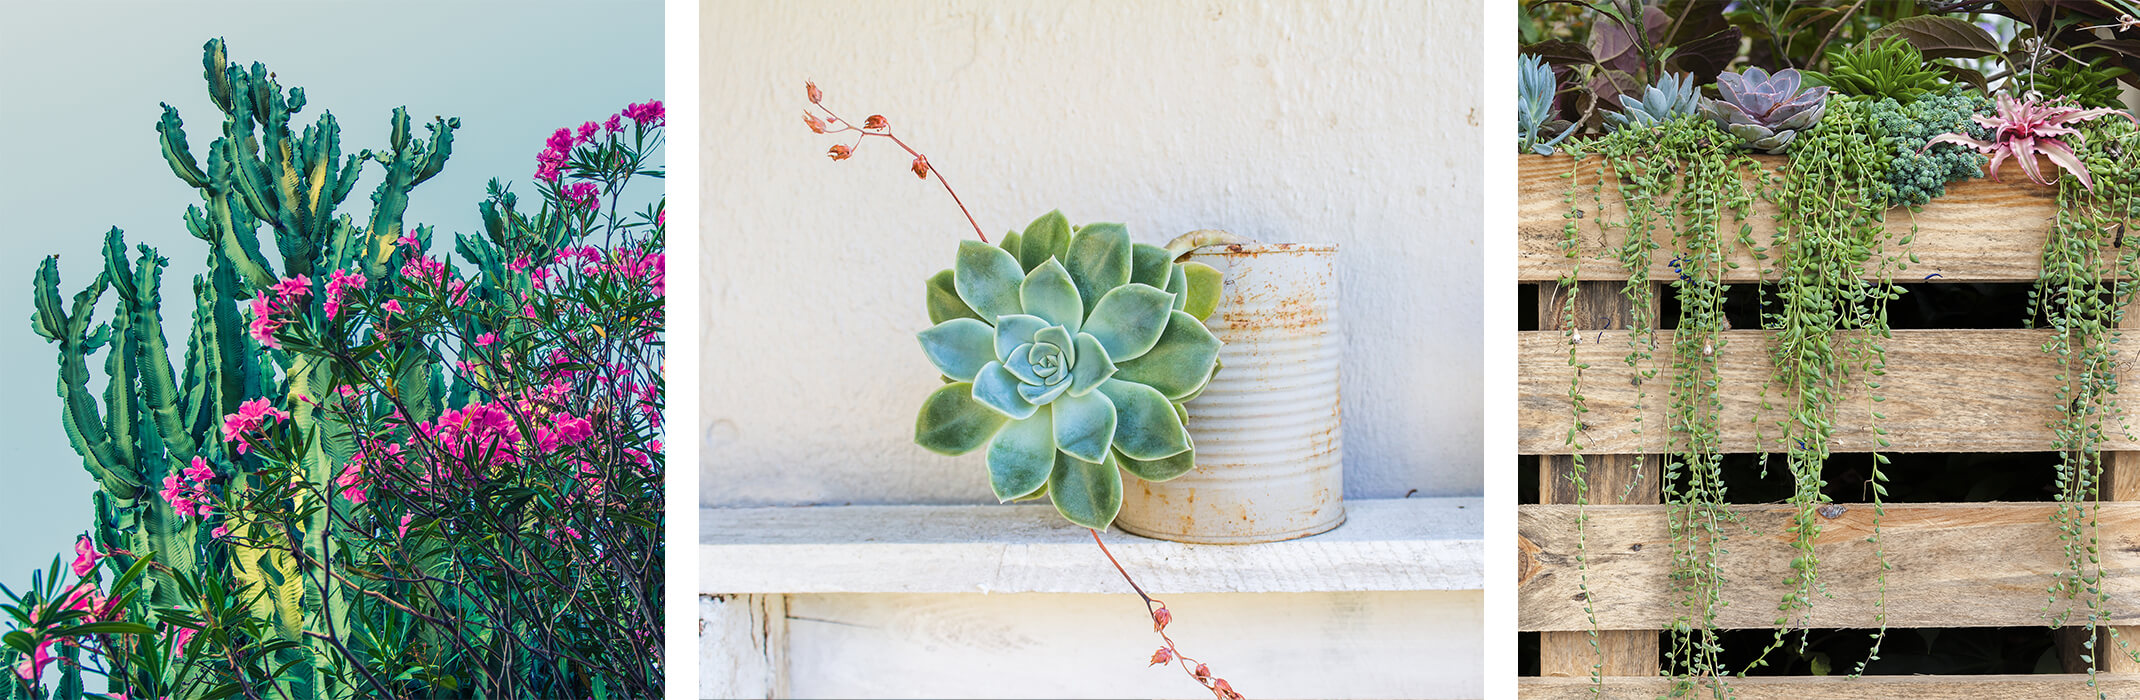 3 images: cactus plant against wall with another plant with purple flowers, a blooming succulent in a white pot on a shelf, and a variety of succulents planted in a wooden vertical planter